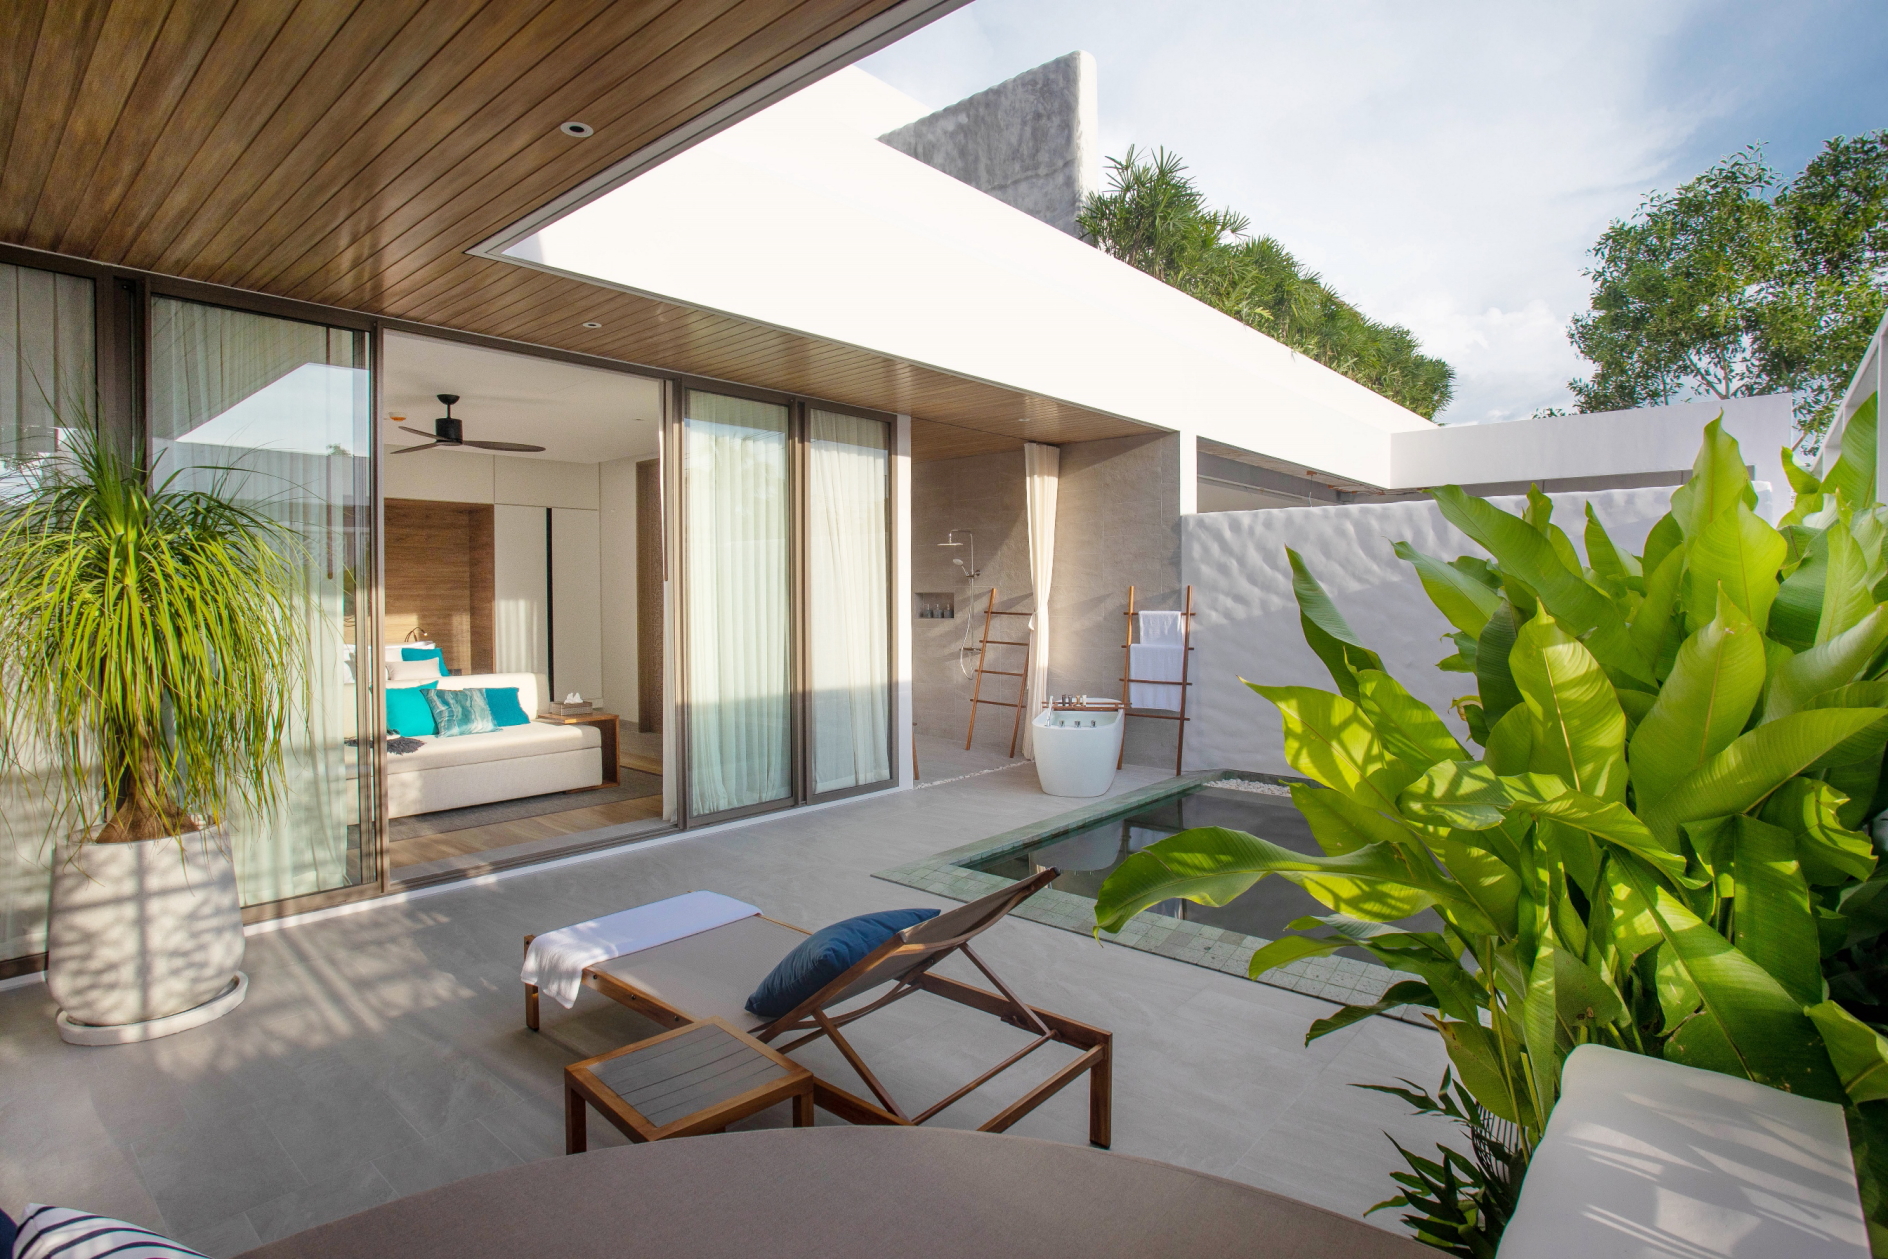 The Mediterranean-inspired accommodation at the Melia Phuket Mai Khao comprises of 30 one-bedroom suites and 70 one-bedroom villas that each cater for up to two adults and two children. All feature outdoor bathtubs, open-air showers and vast outdoor terraces. Click to enlarge.